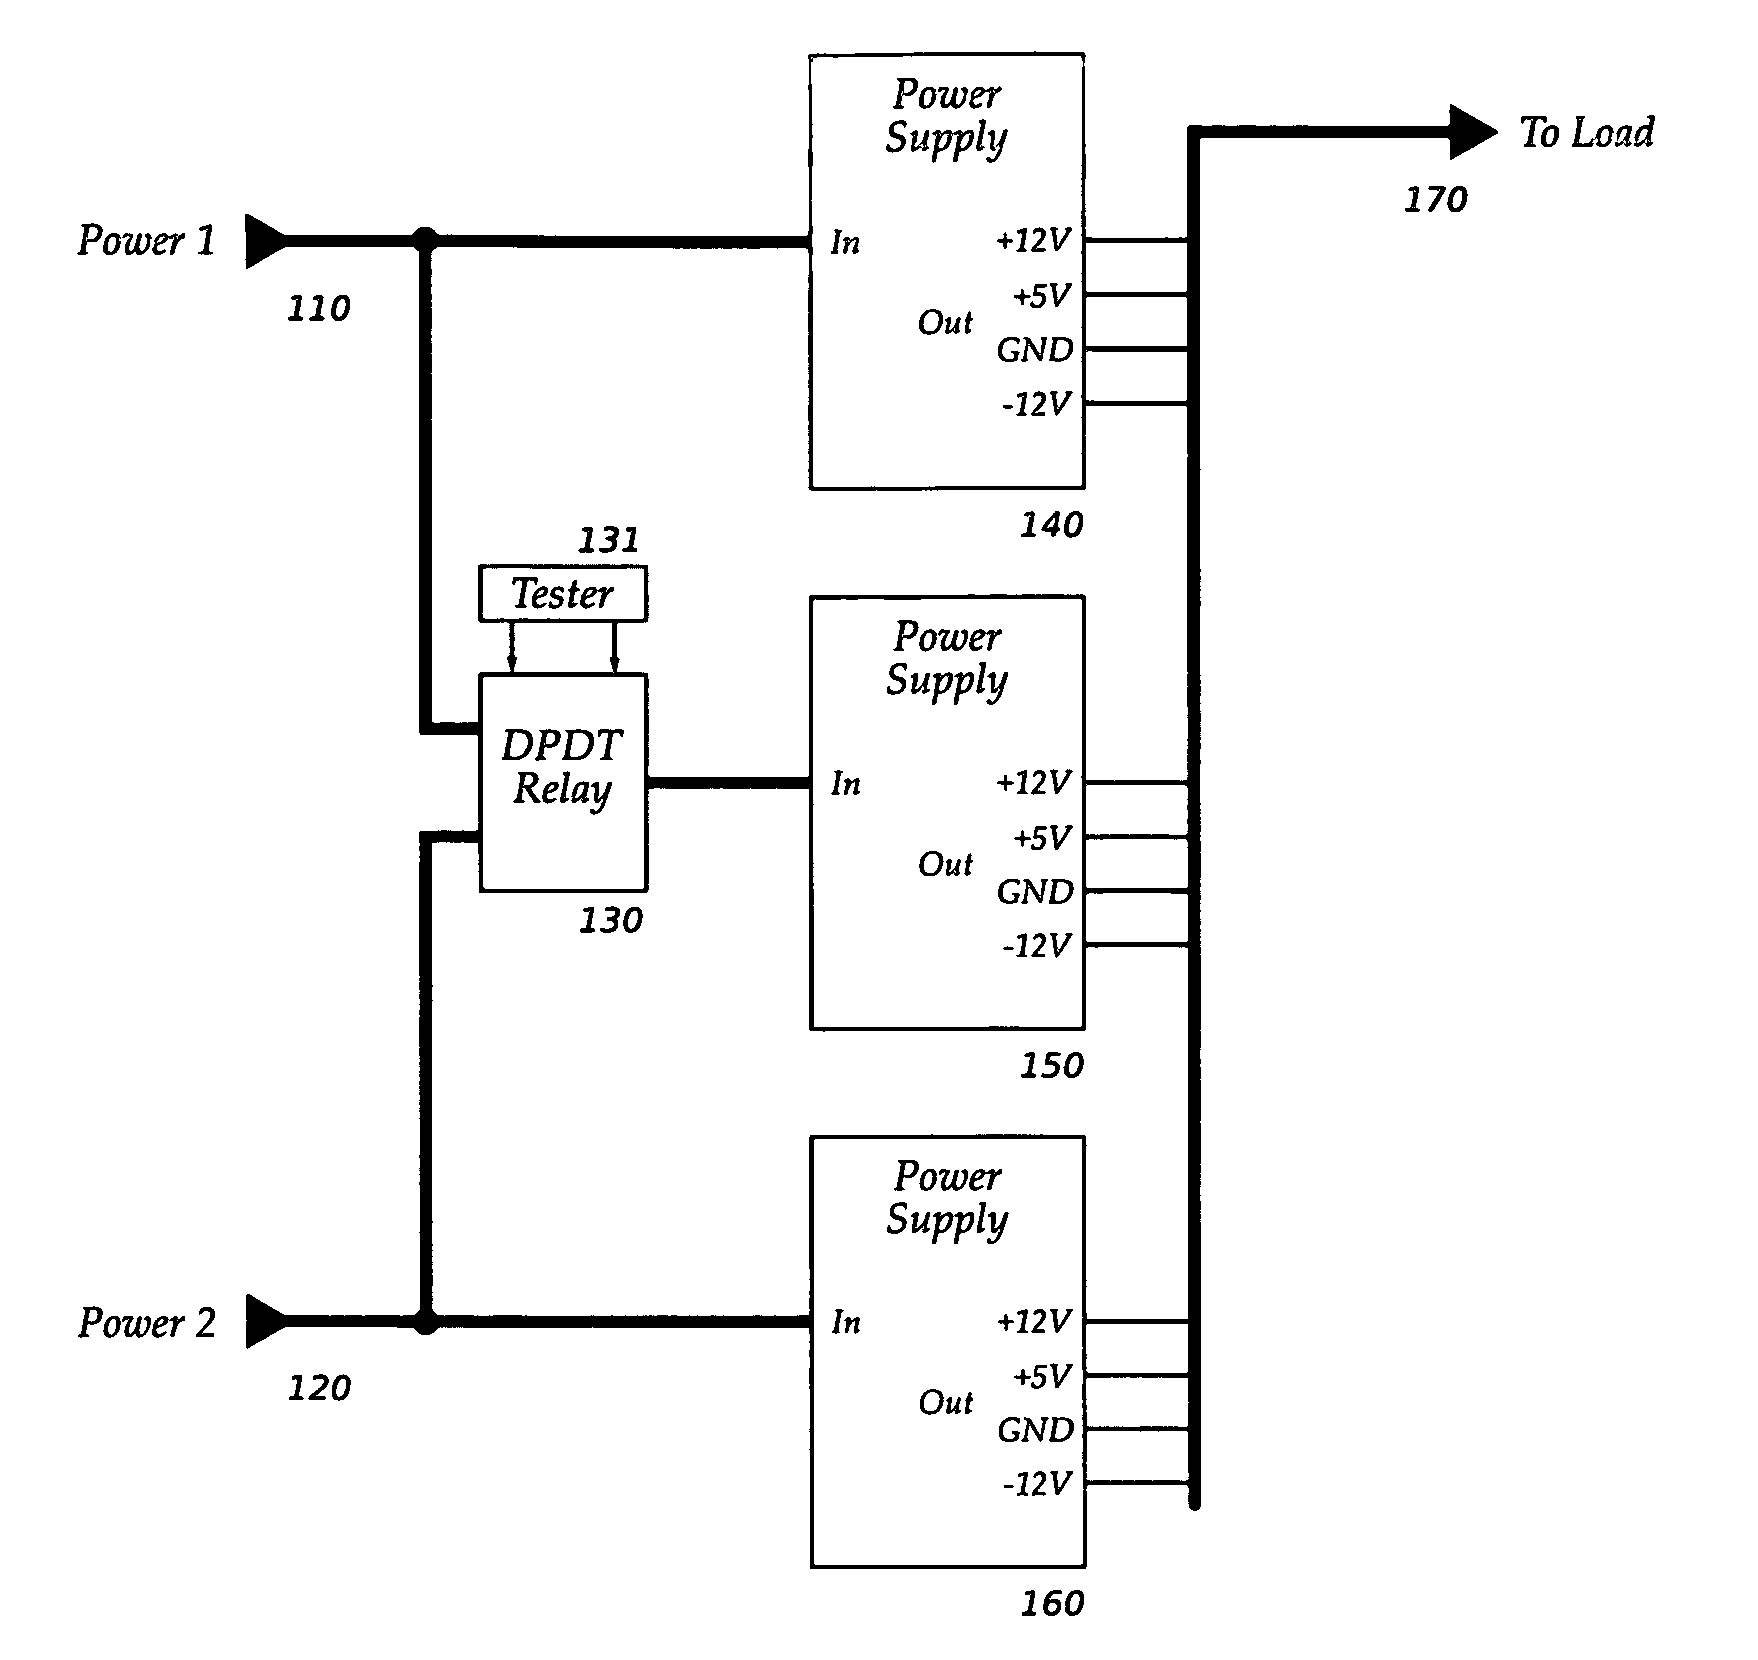 Redundant power system with no latent single failure point